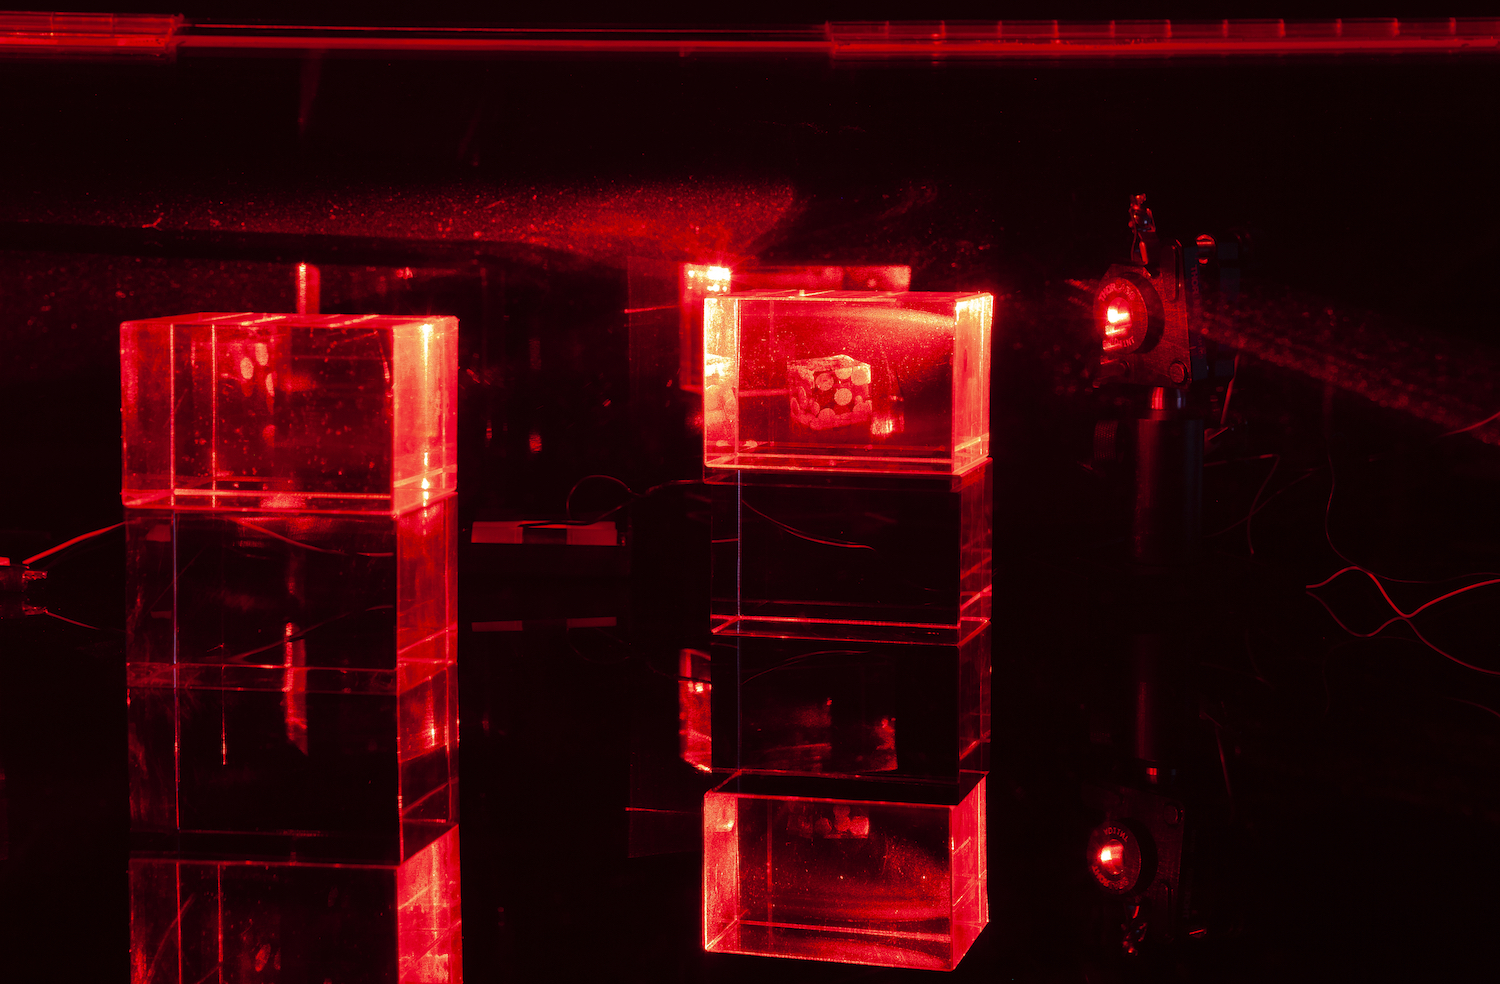 Constantina Zavitsanos, *Boxed Bet*, 2019. Transmission holograms, acrylic mounts, 5mW red laser. Detail view

[image description: Against a darkened black background, two glowing glowing red holograms on dimensional clear acrylic mounts. Holographic images of dice mid-roll are lit by a red laser in a scientific metal mount. The light reflects against the back and bottom black plexiglass surfaces.]